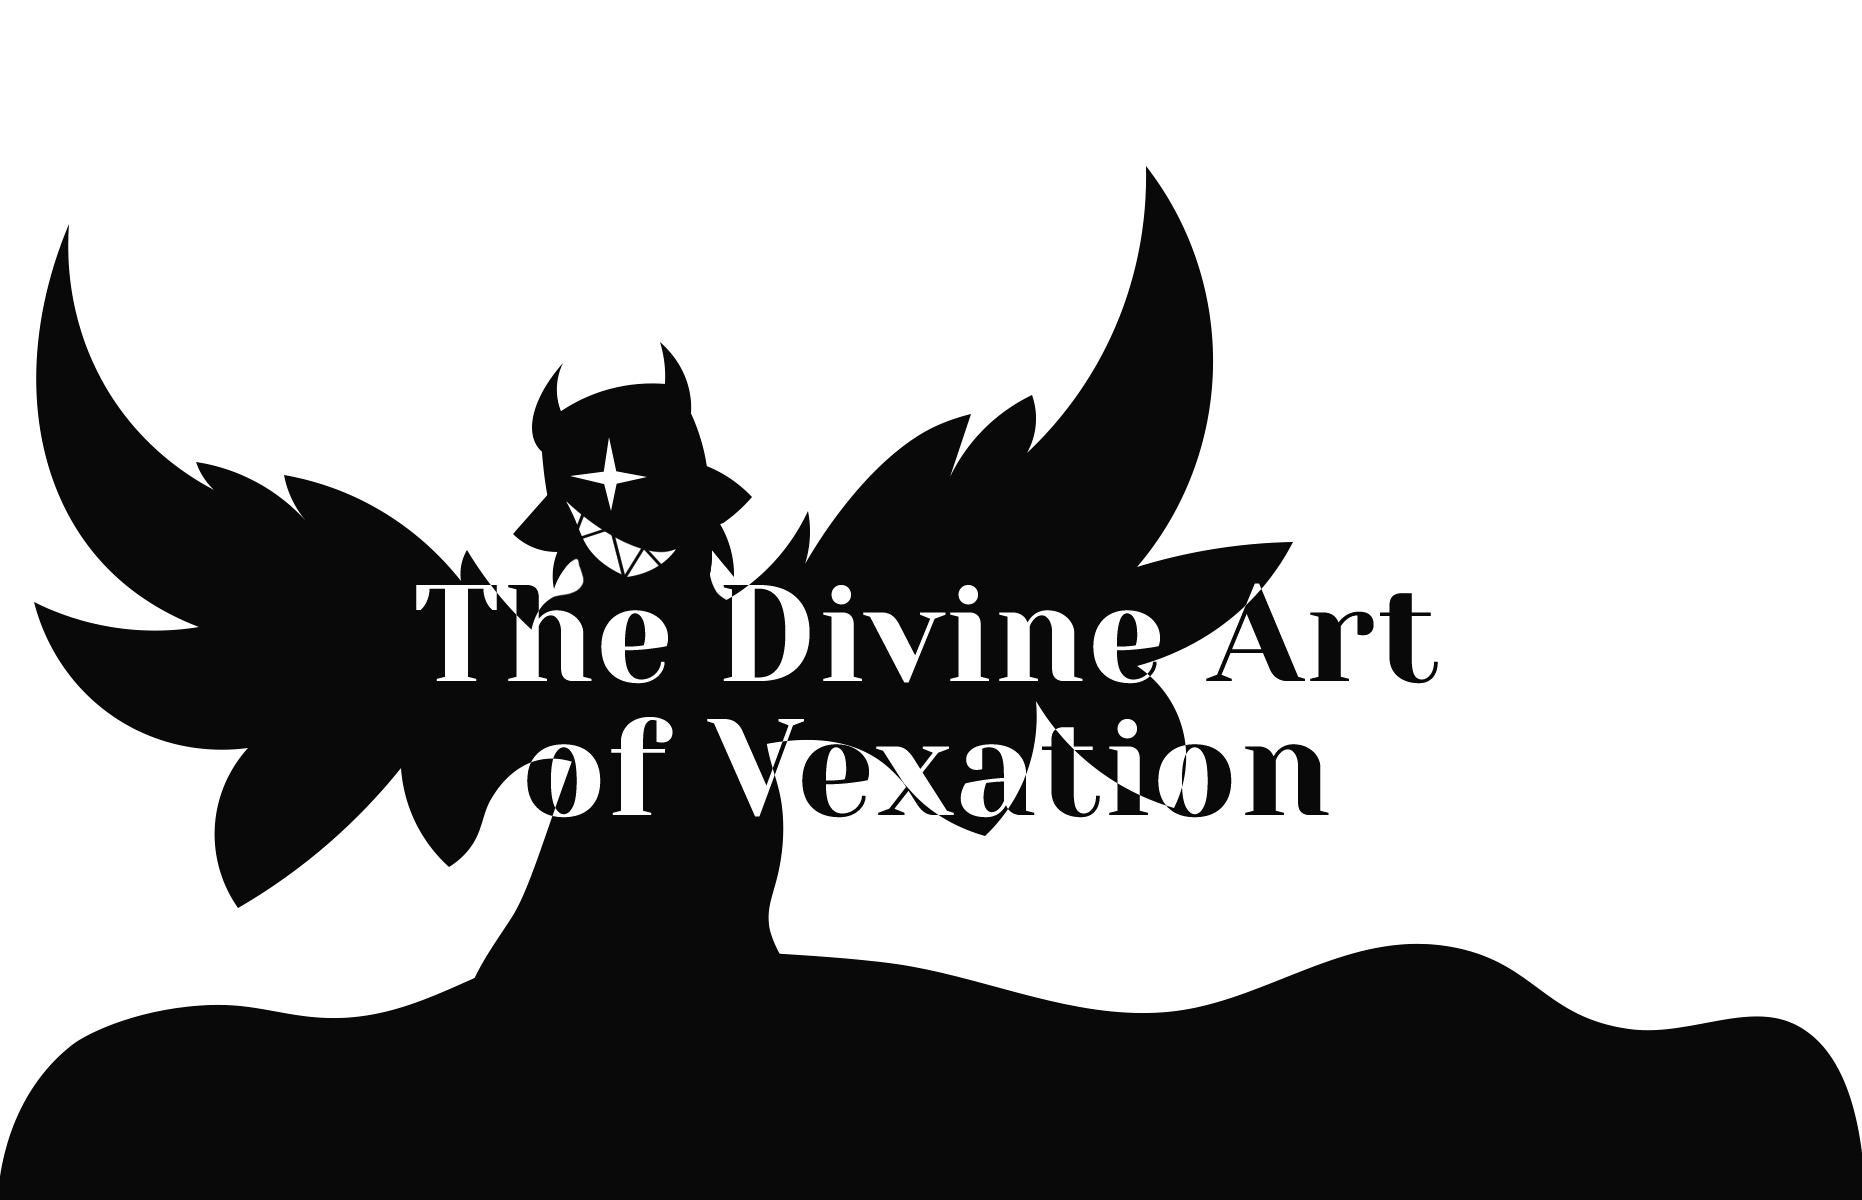 The Divine Art of Vexation